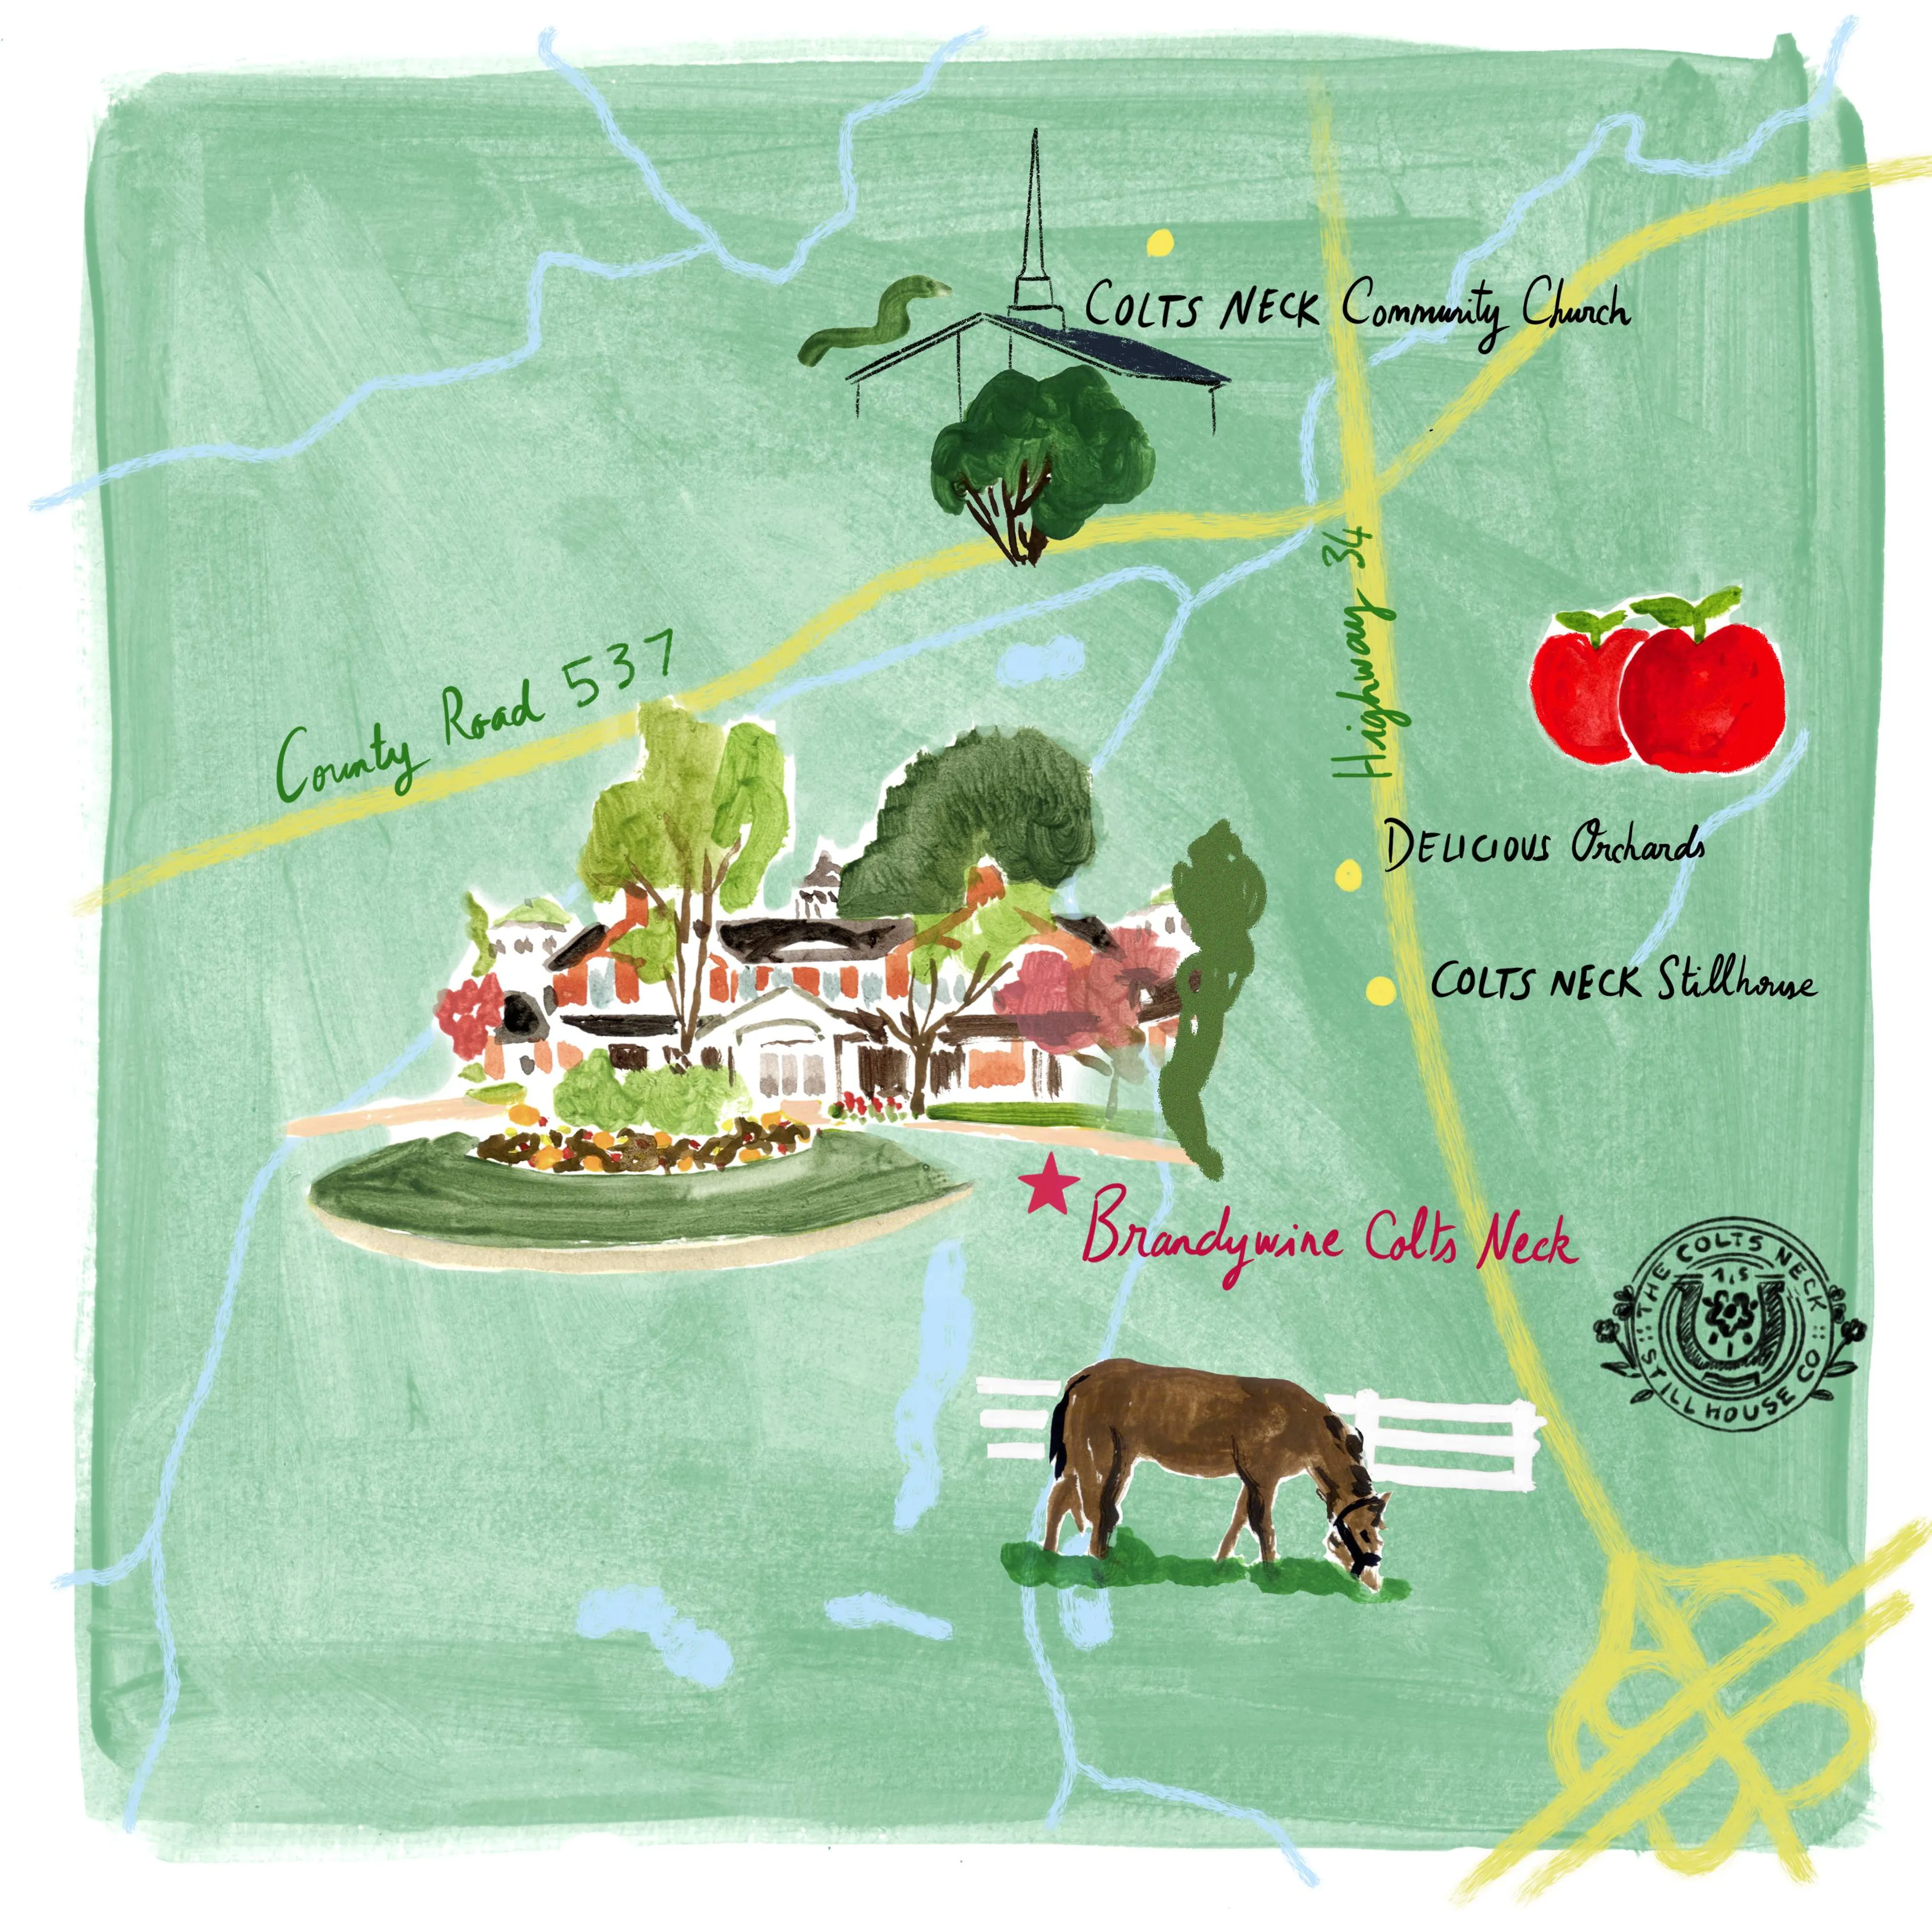 Hand-illustrated map of major roads and landmarks surrounding Brandywine in Colts Neck, NJ